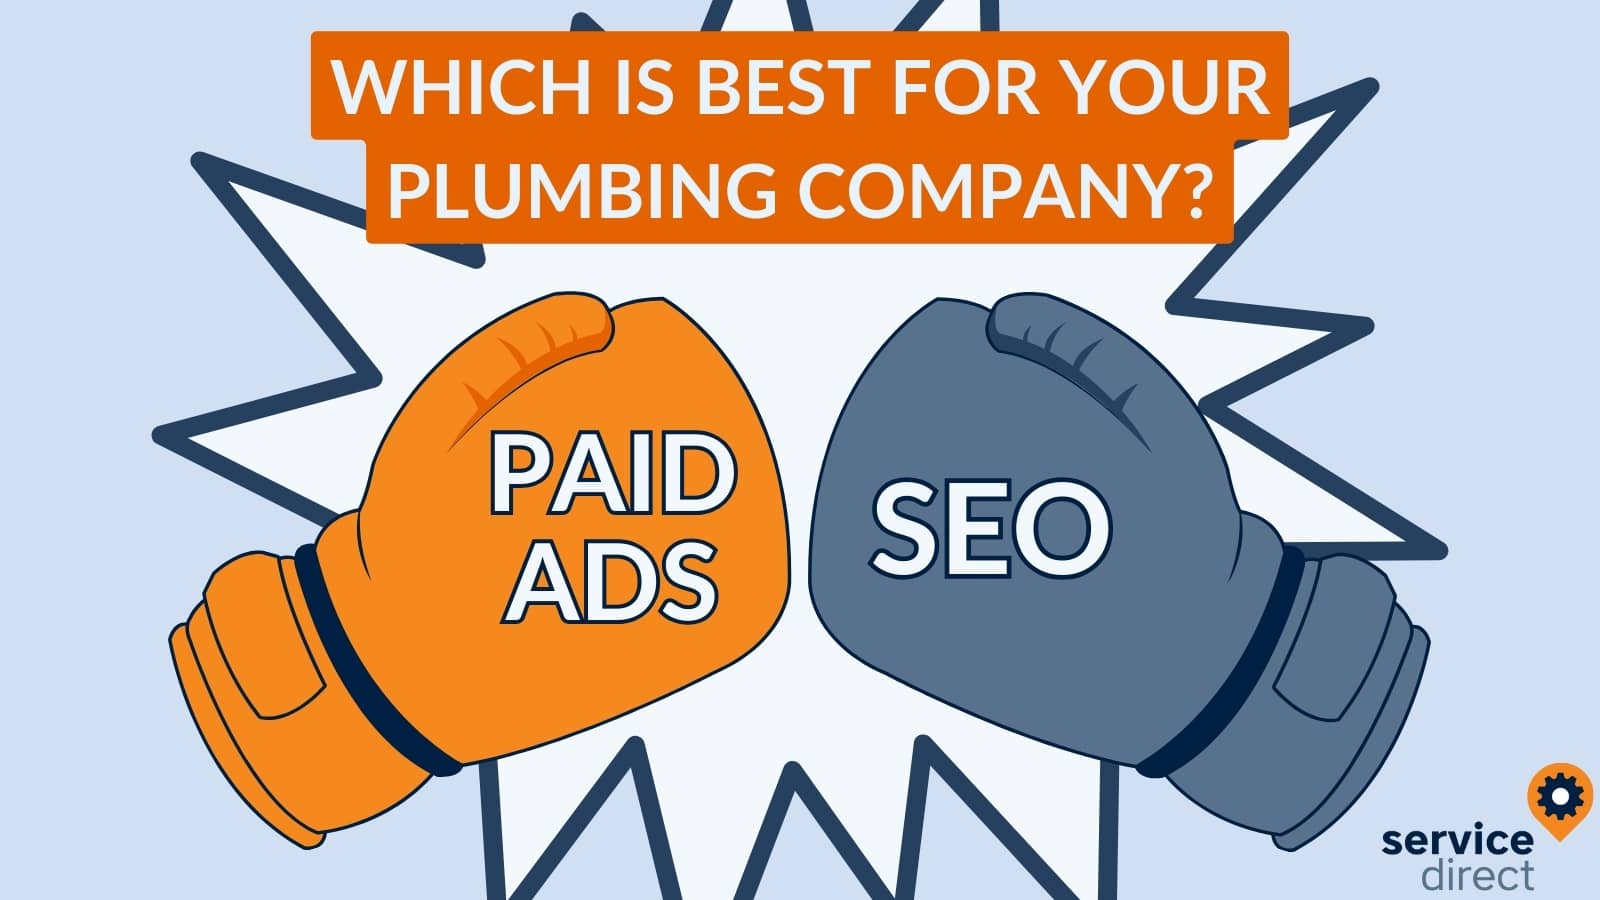 Paid ads versus SEO which is best for your plumbing company?